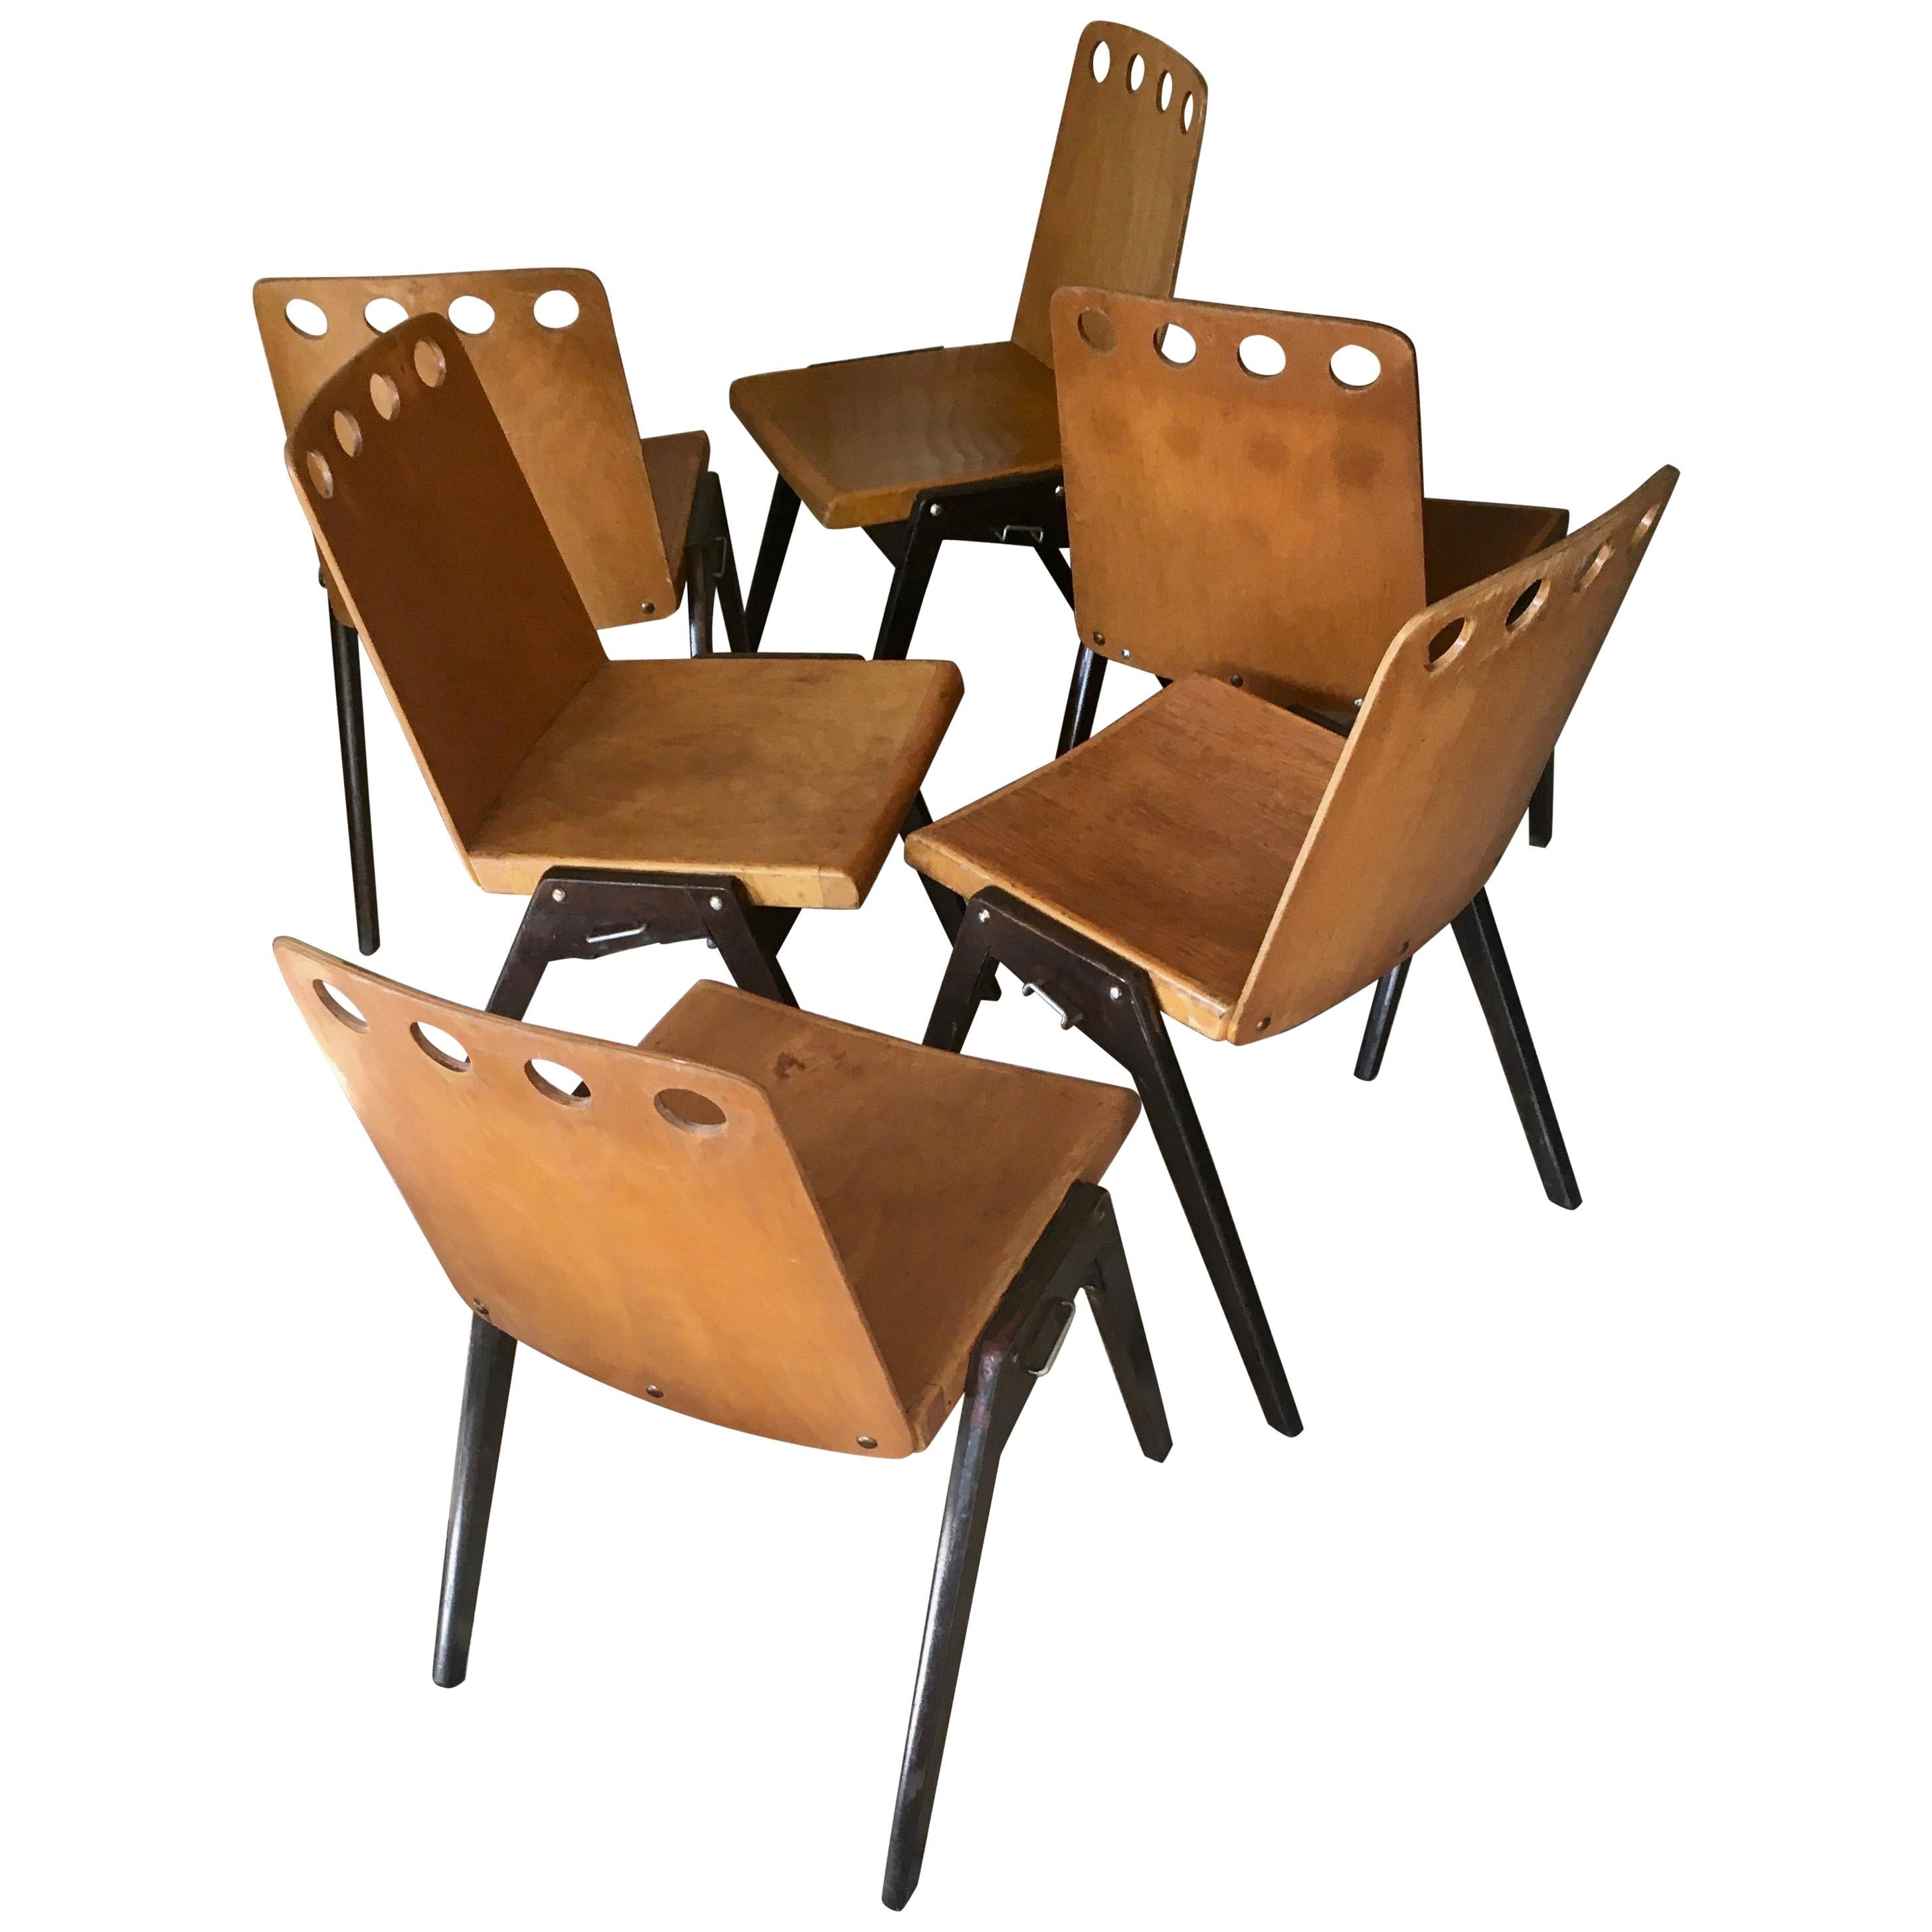 Six Stackable Industrial Chairs in the Spirit of Jean Prouvé, France, 1950